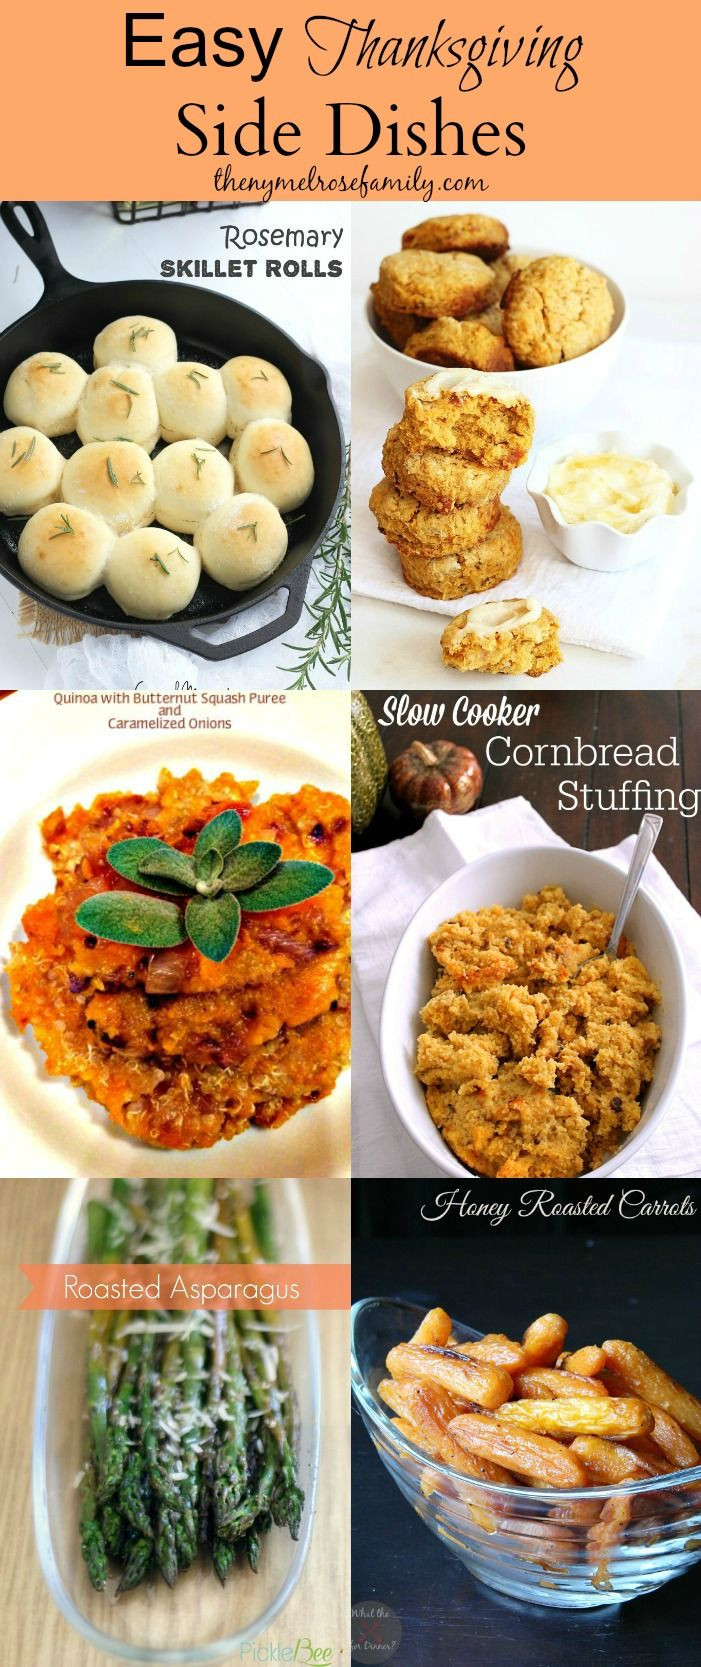 Easy Side Dishes For Thanksgiving Meal
 199 best images about Easy Thanksgiving Recipes & Crafts